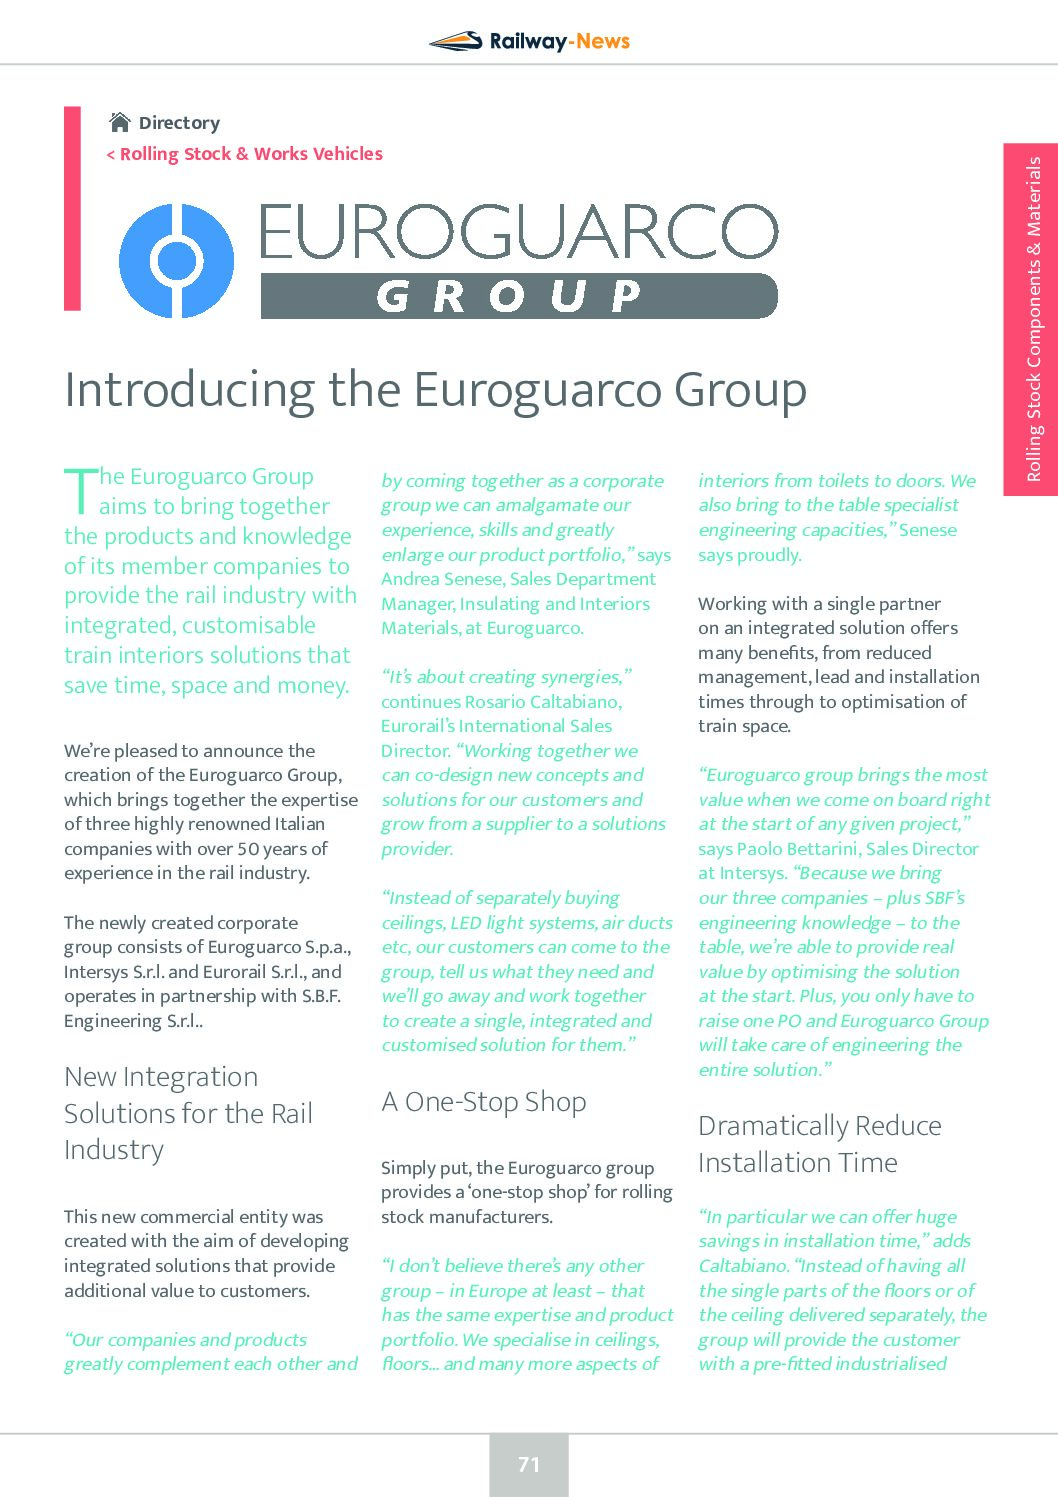 Introducing the Euroguarco Group